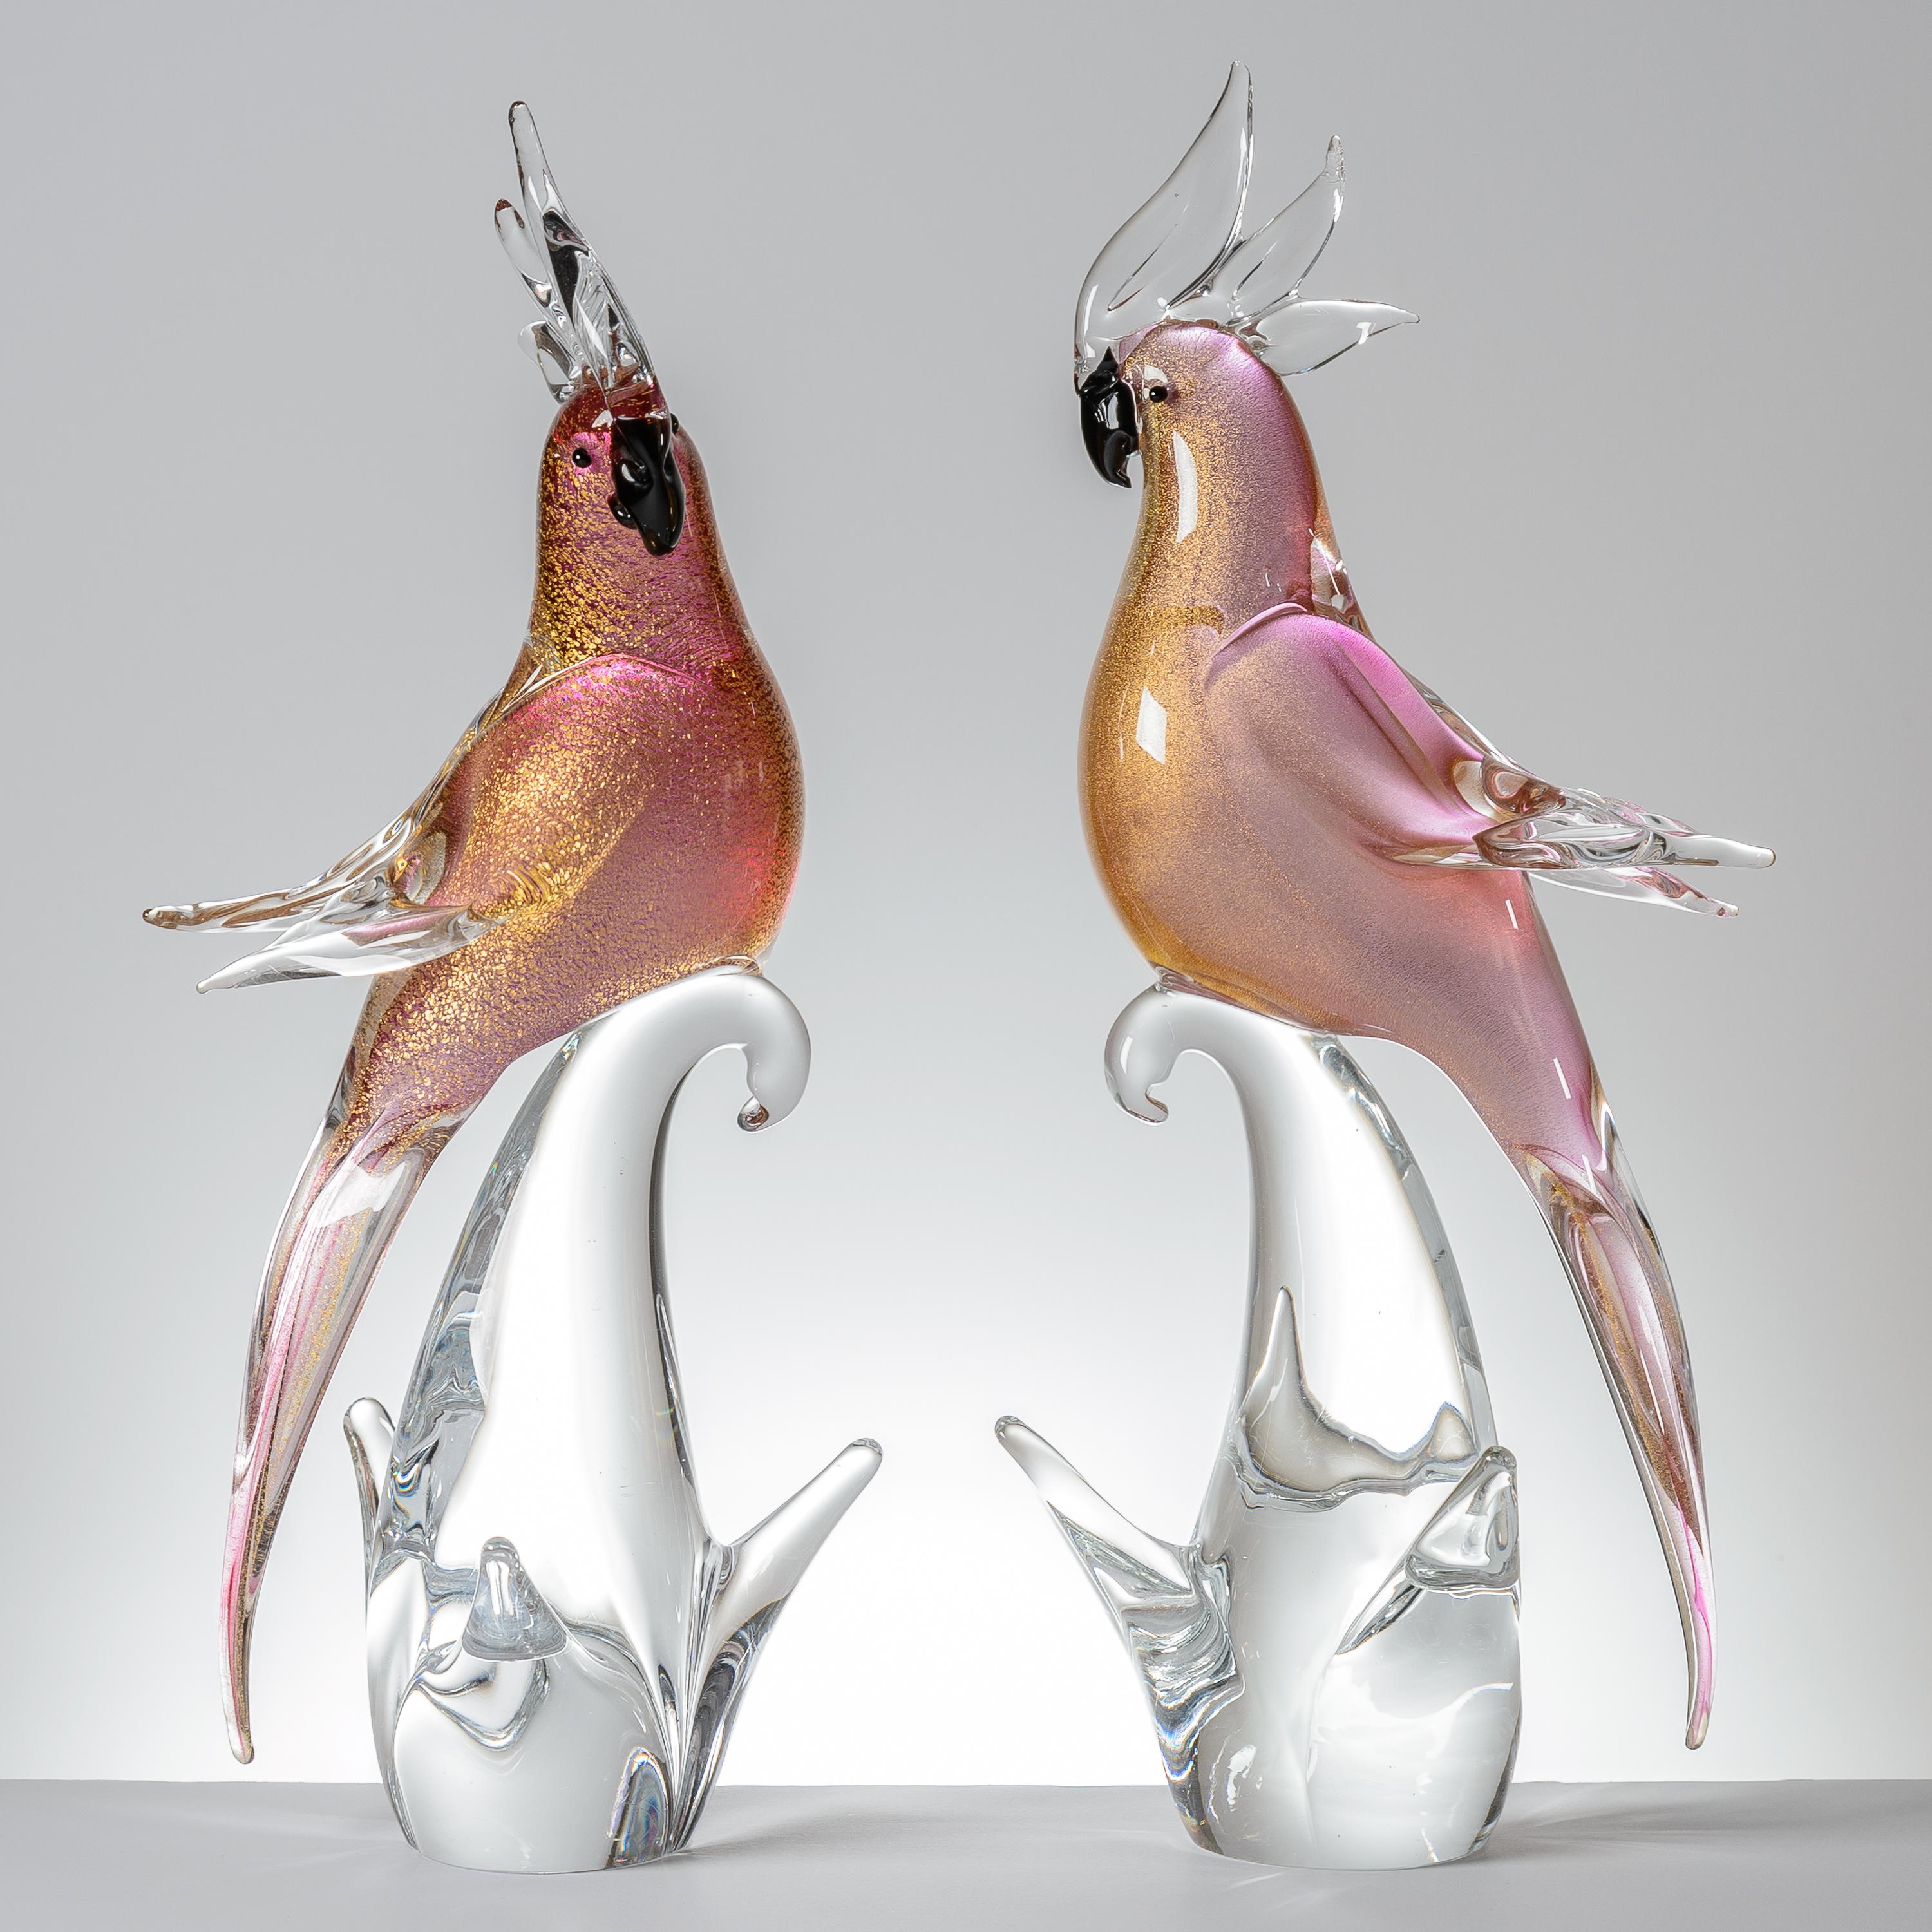 A pair of tall vibrant pink and clear blown art glass bird sculptures by one of the re known firms from the Isle of Murano in Italy. This pair features nice details to their faces and bodies with just the right amount of pink and blown 24 karat gold